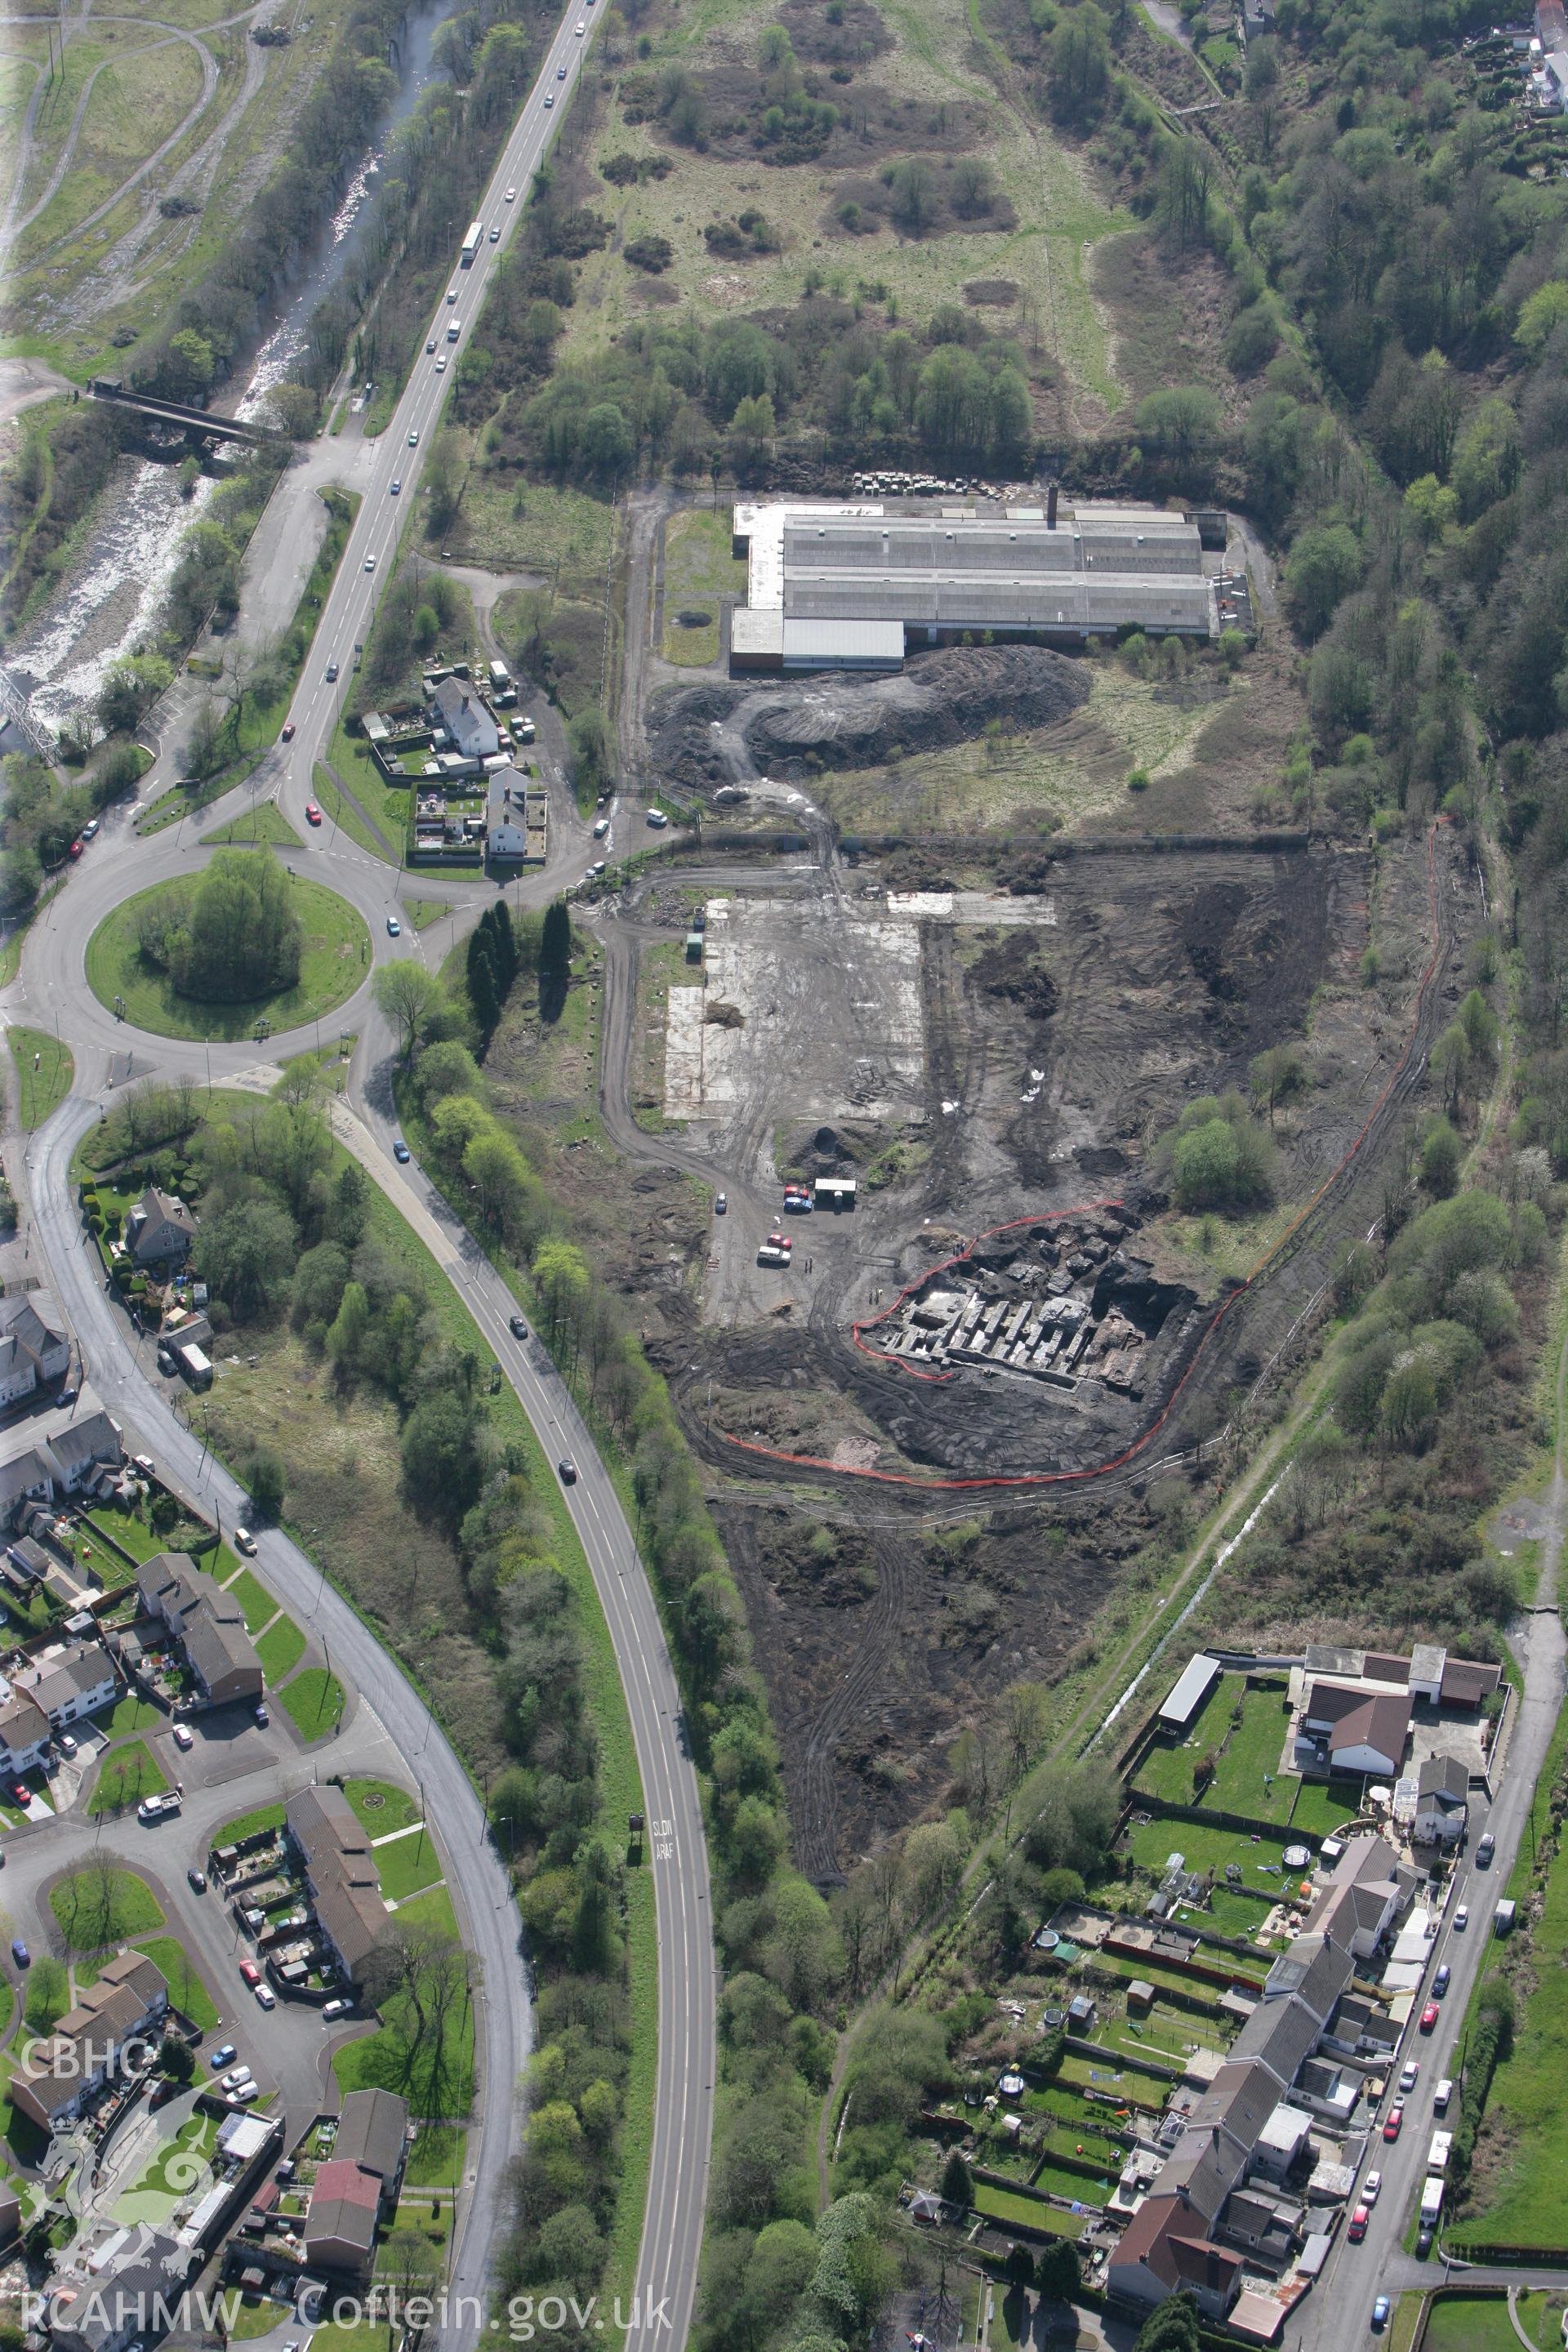 RCAHMW colour oblique photograph of Ystalyfera Iron And Tinplate Works. Taken by Toby Driver on 08/04/2011.